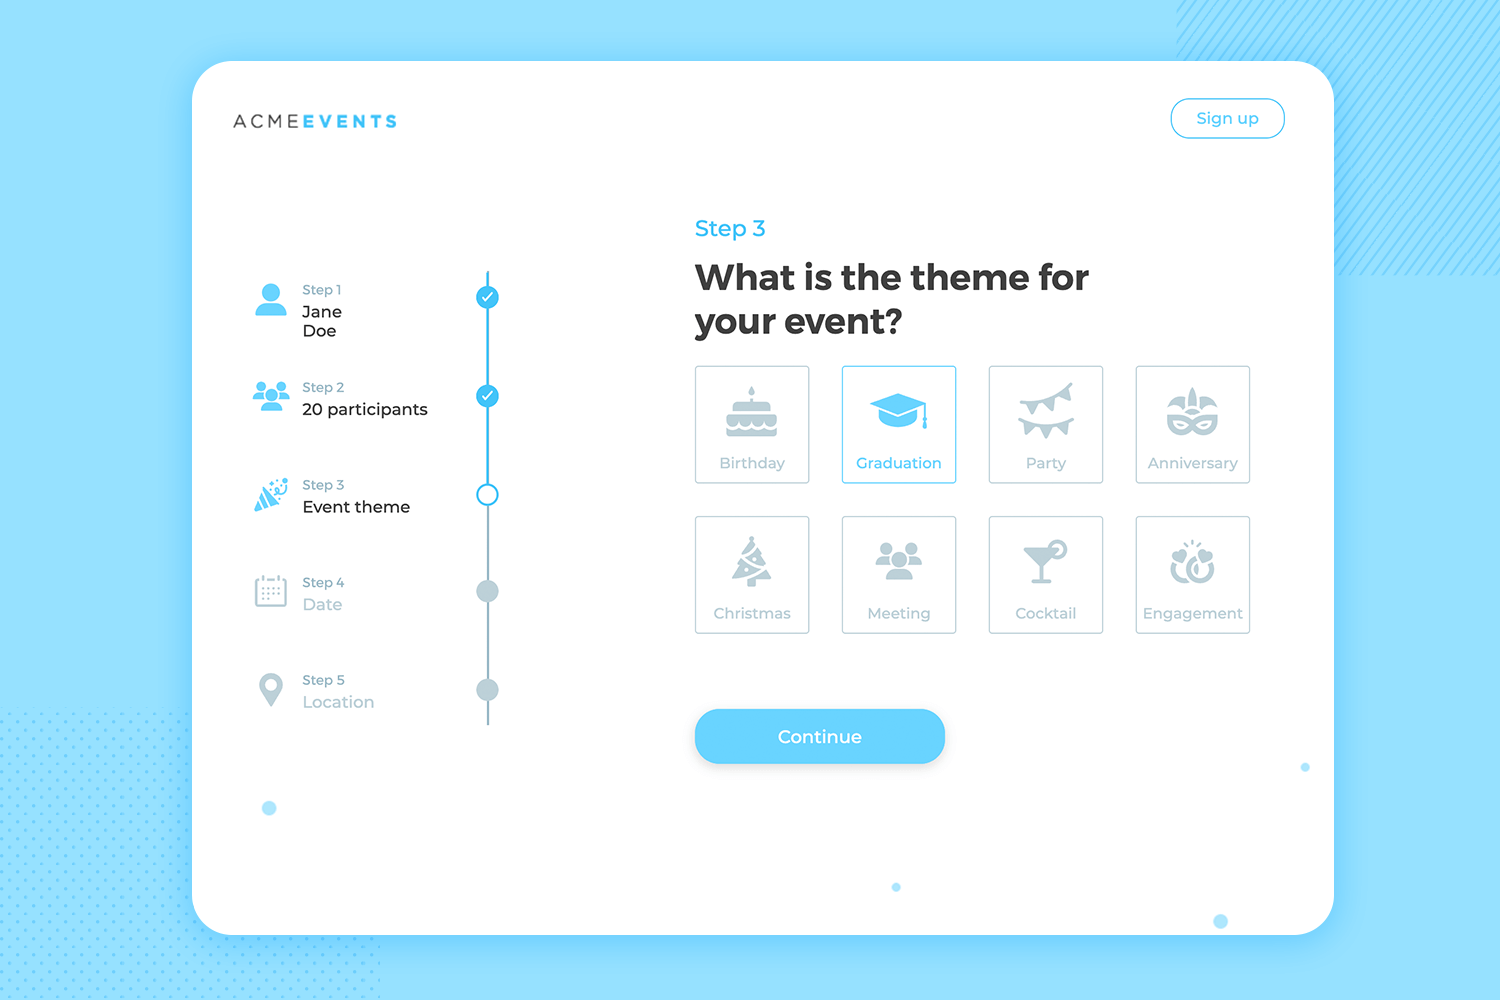 Event registration form mockup with a clean interface. Features step-by-step navigation for entering participant details, selecting event theme, date, and location